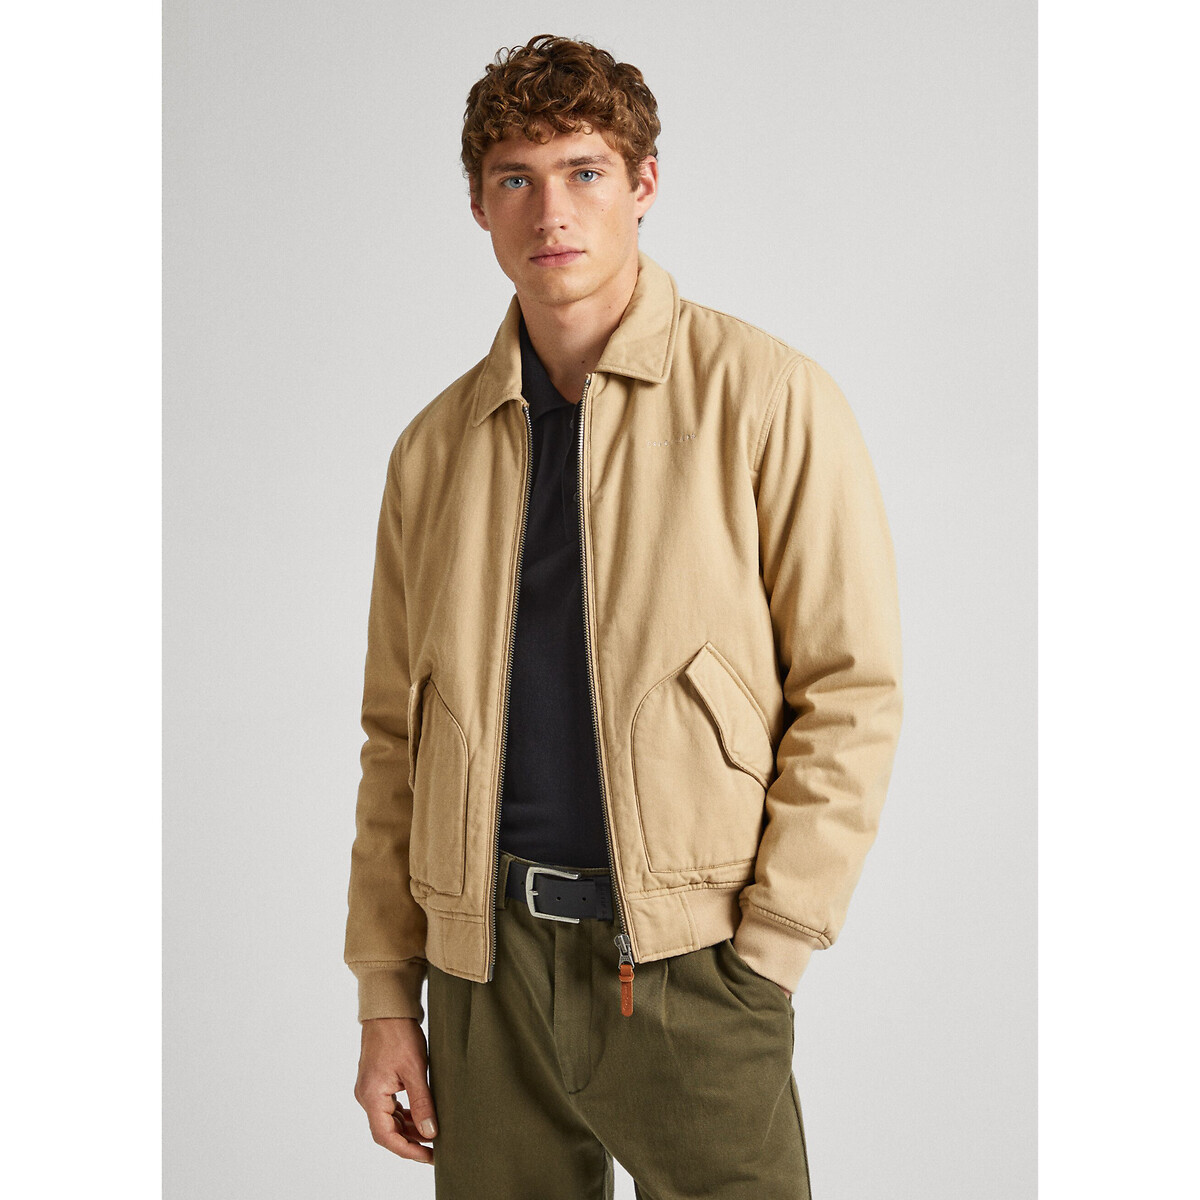 Image of Cotton Aviator Jacket with Pockets